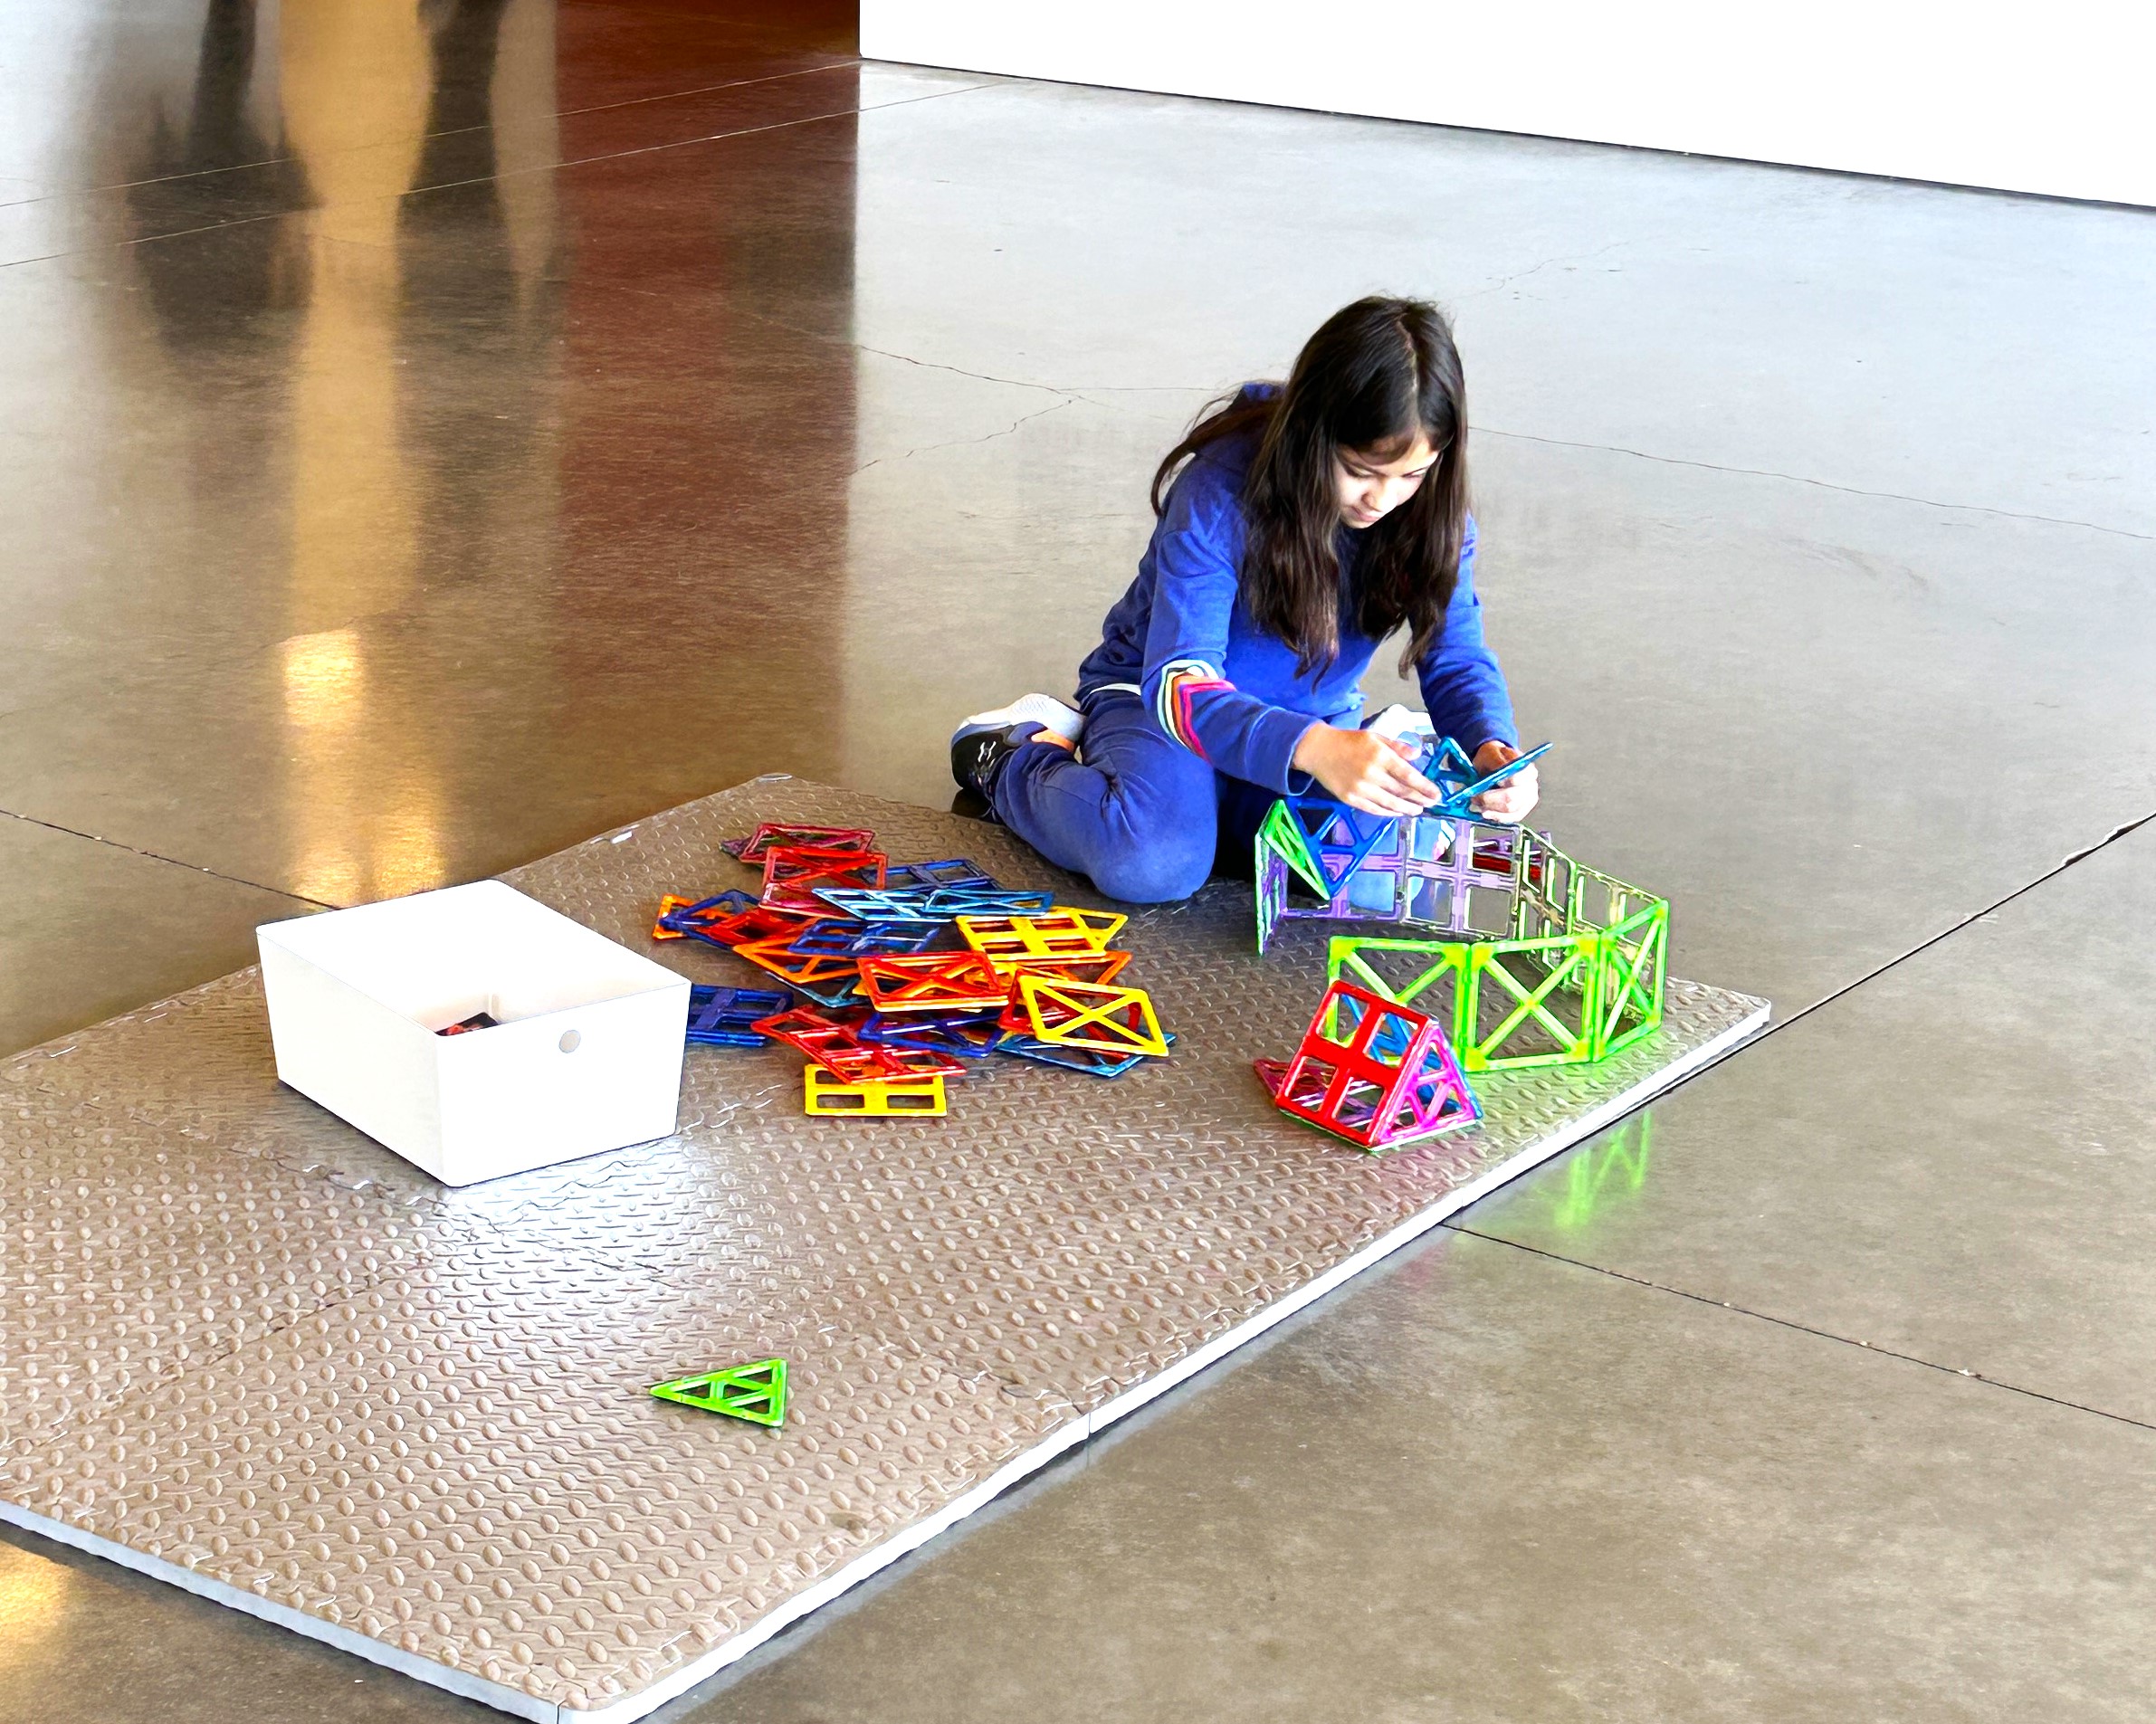 Young Girl in the Creativity Space at the Museum